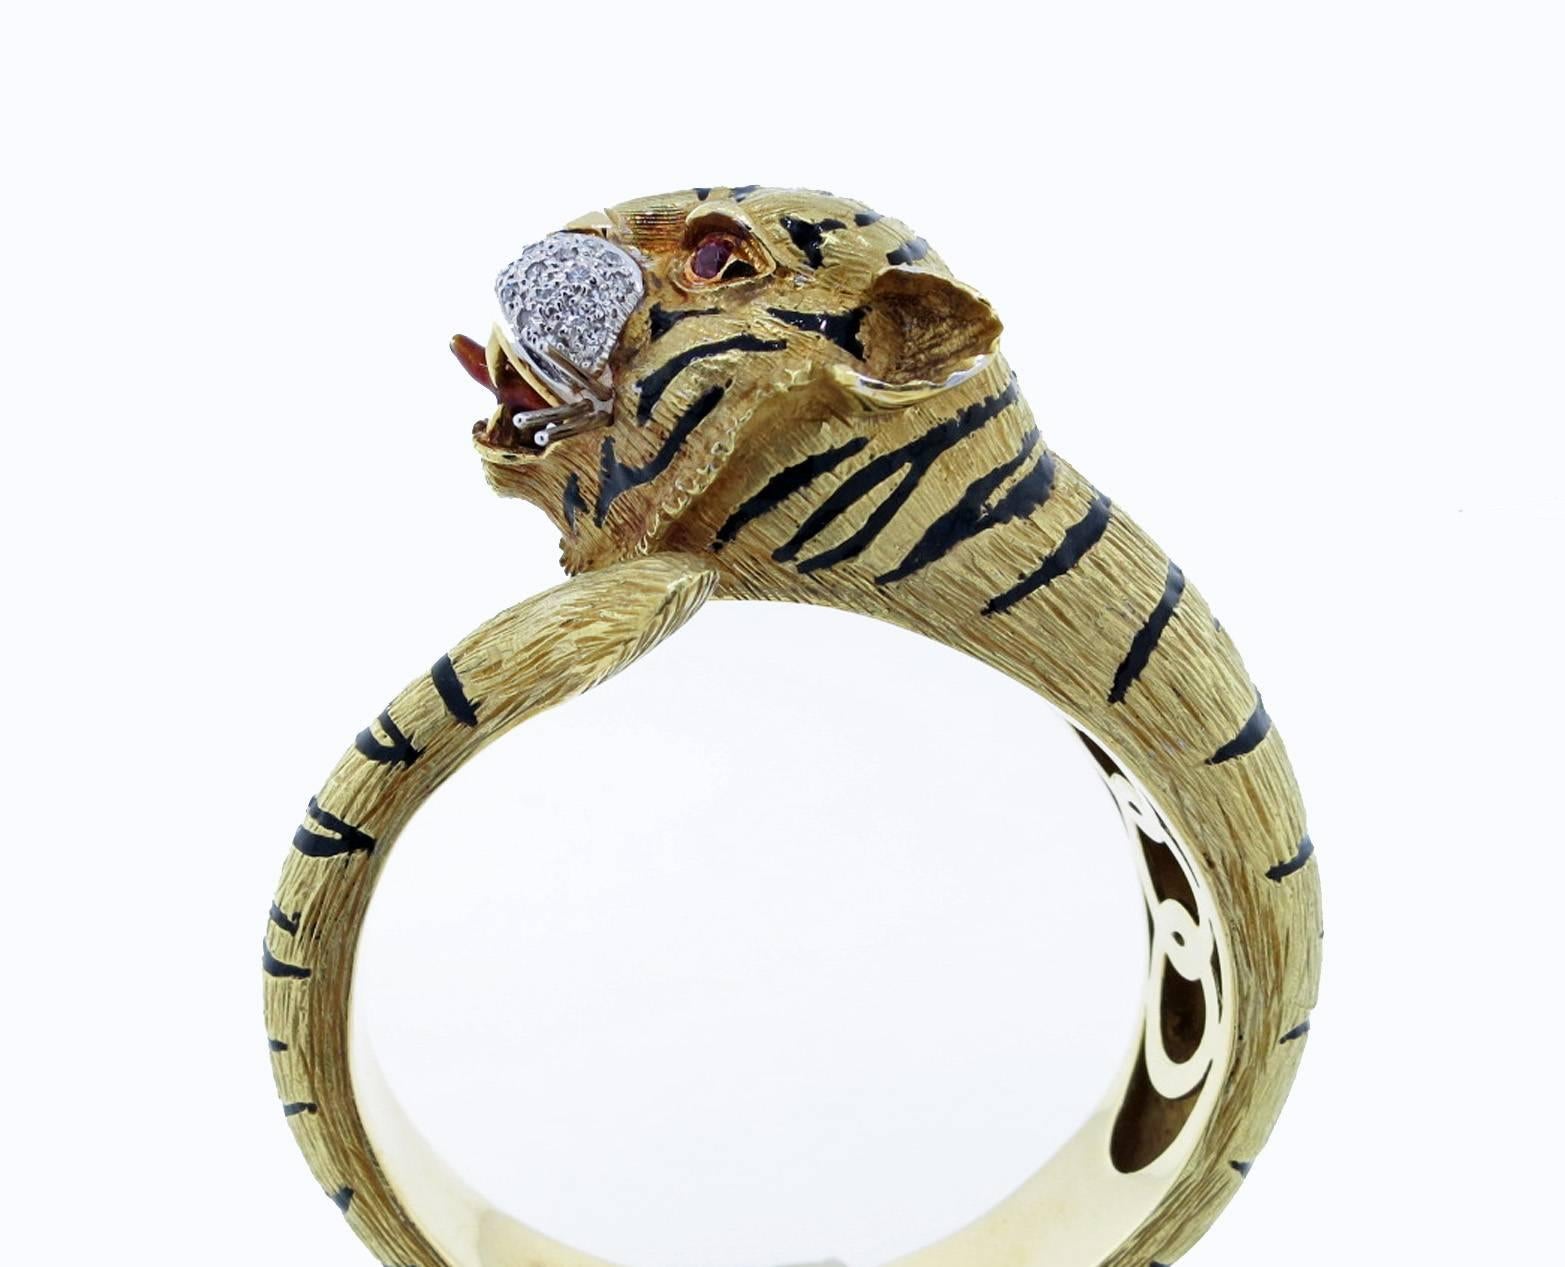 Impressive textured well executed 18kt yellow gold hinged tiger bracelet. The tiger stripes are in black enamel, the whiskers and face are white gold. The face is bead set with 44 round brilliant cut diamonds. The eyes are set with round faceted